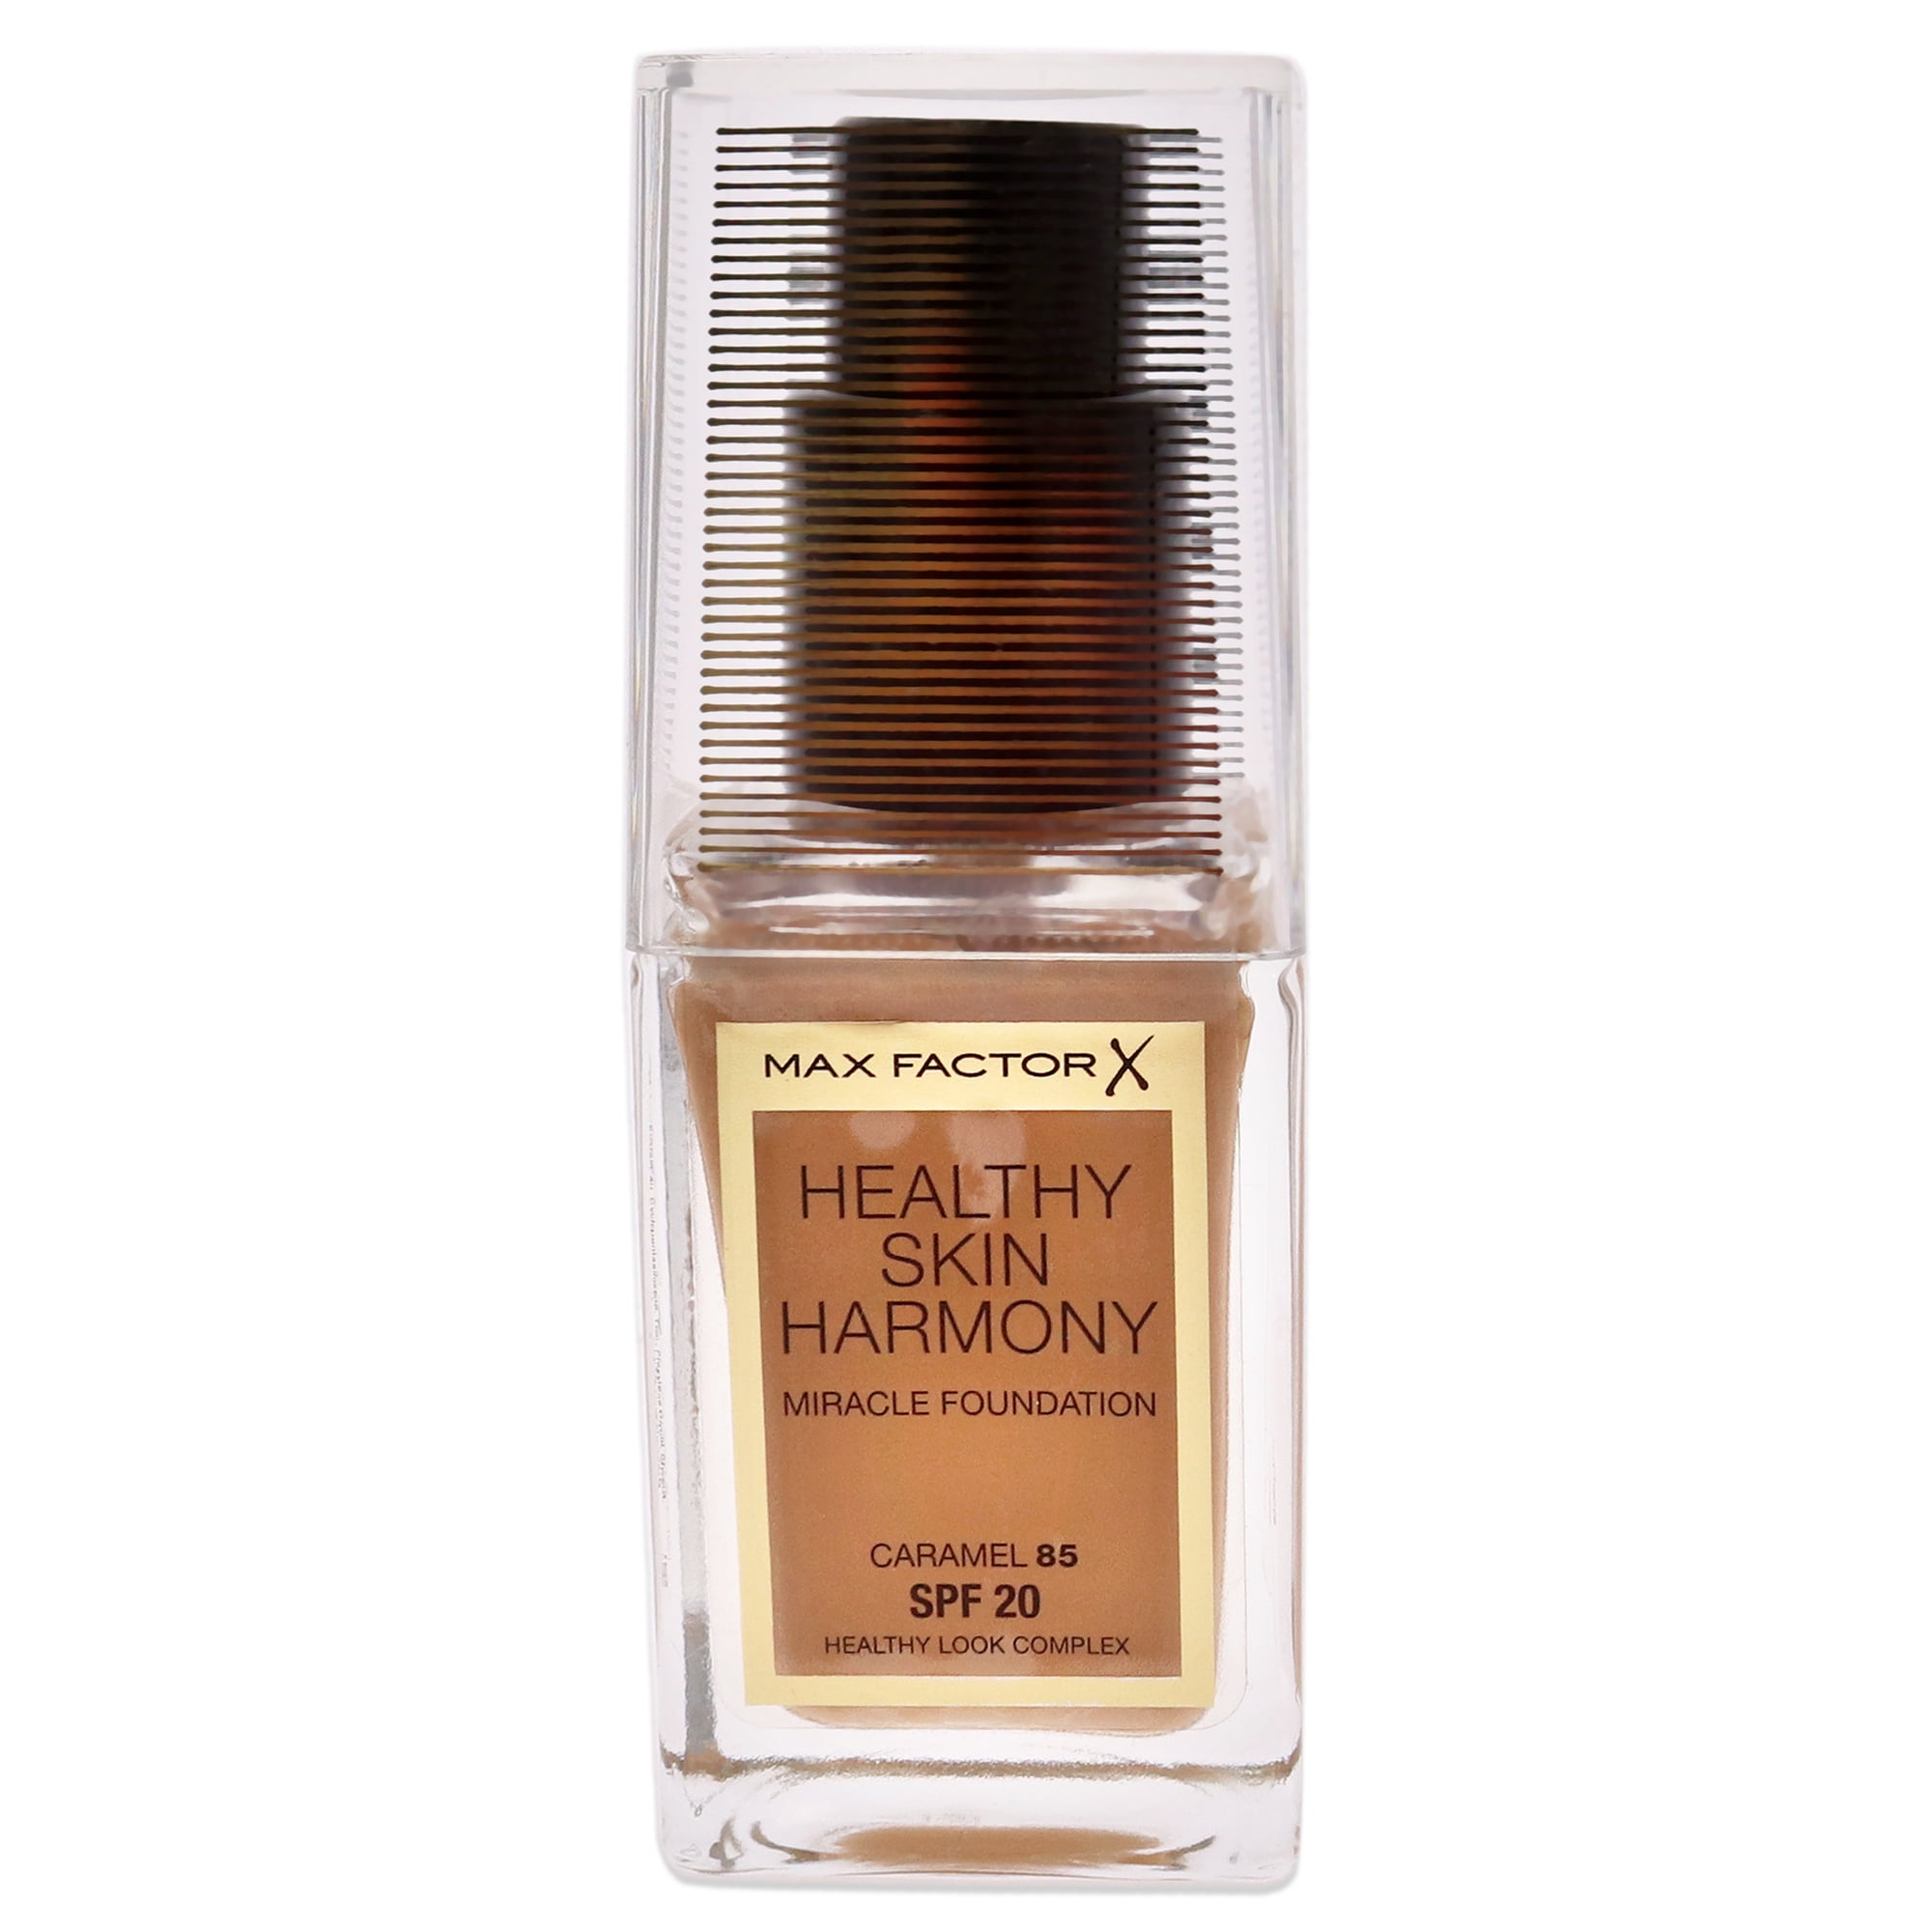 Max Factor Healthy Skin Harmony Miracle Foundation SPF 20 - 85 Caramel -  Pack of 2, 1 oz Foundation